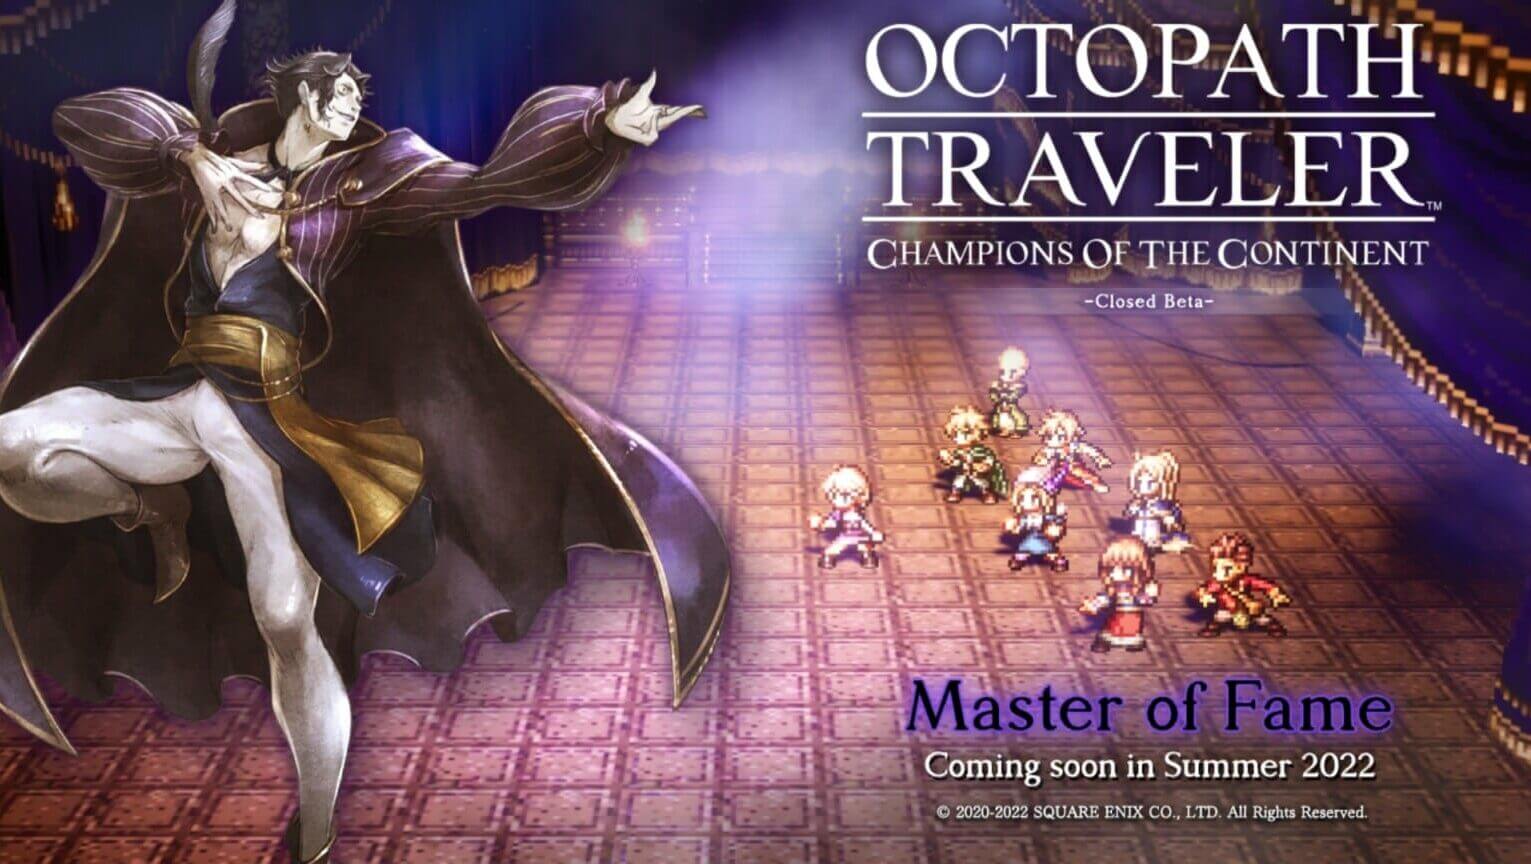 Octopath-Traveler-Champions-of-the-Continent.jpg